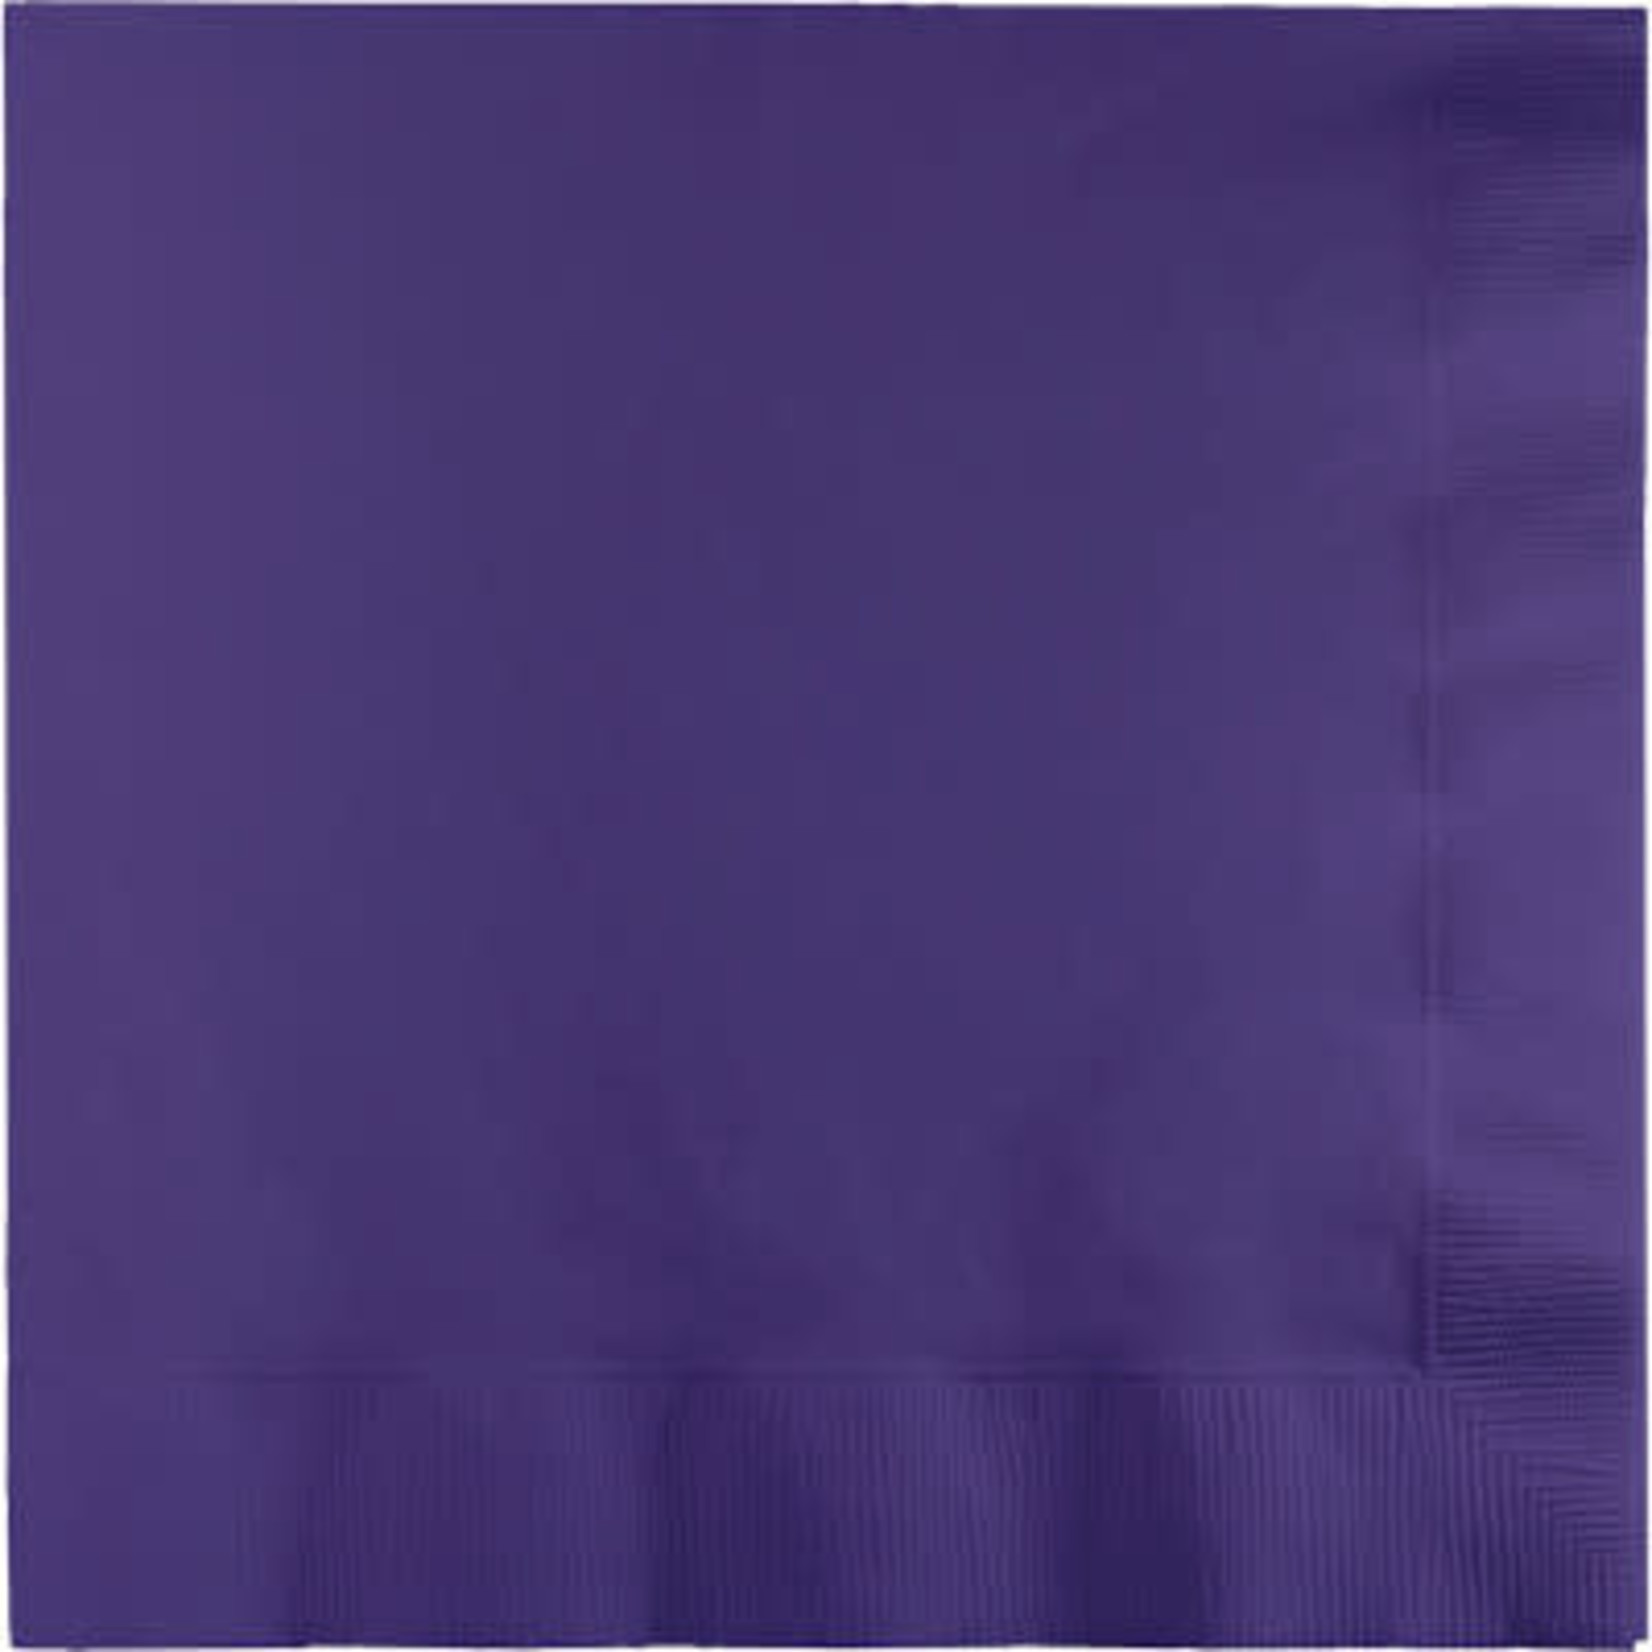 Touch of Color Purple 3-Ply Dinner Napkins - 25ct.